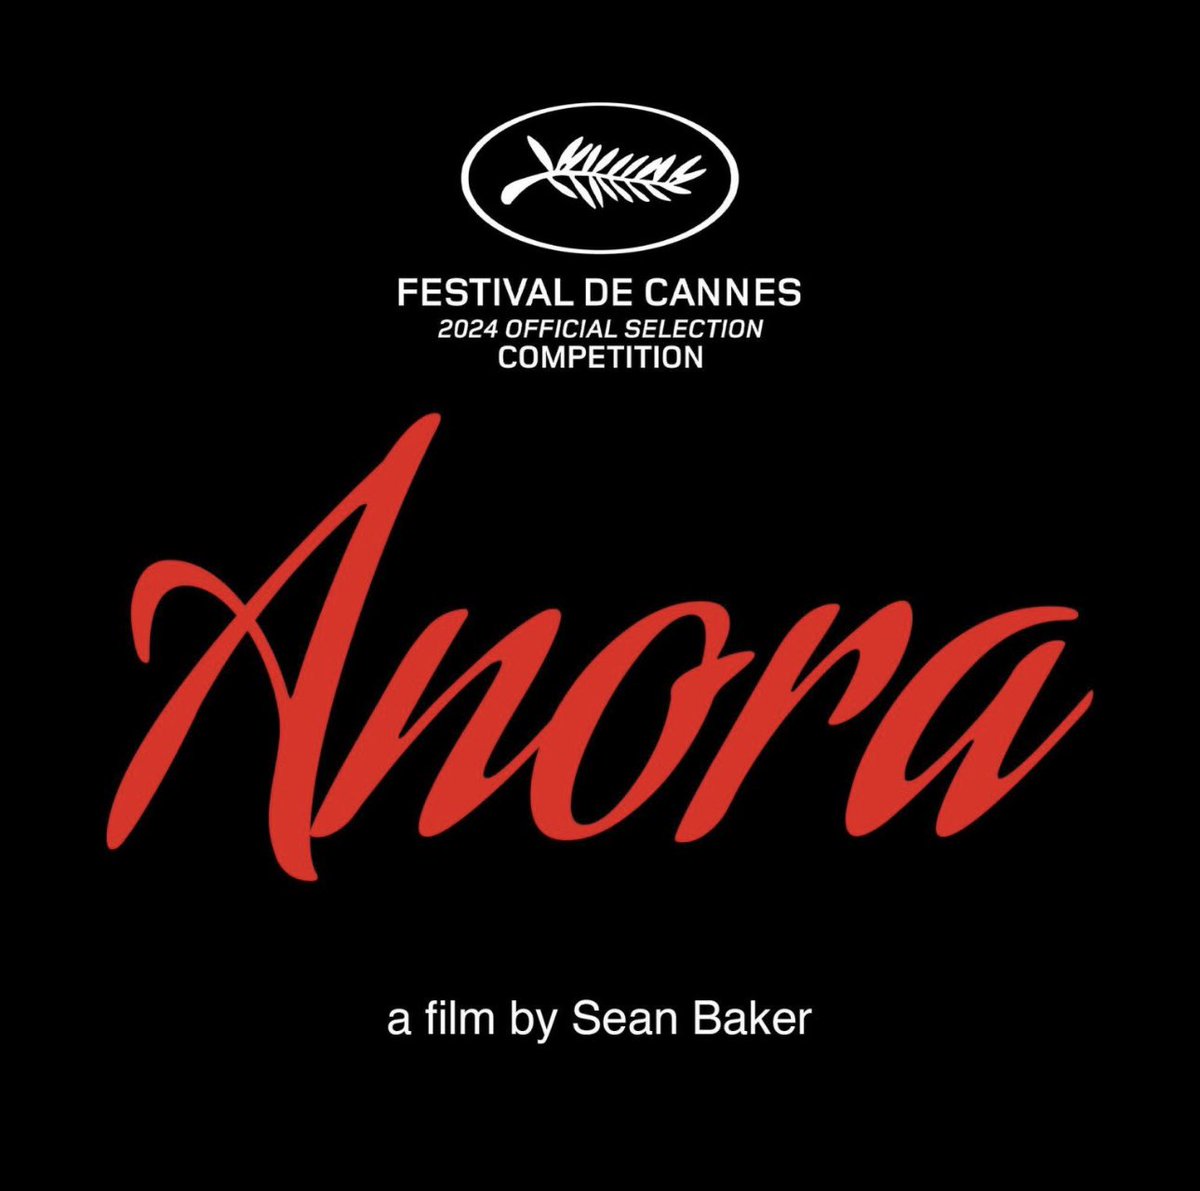 Thrilled to announce that one of my songs will be debuted in the film Anora at the Cannes Film Festival on May 14th!

Thank you to @instylemusic for making this a reality 💪

#CannesFilmFestival #FilmMusic #MusicLicensing #MusicSupervision #SeanBaker #cannes #filmfestival